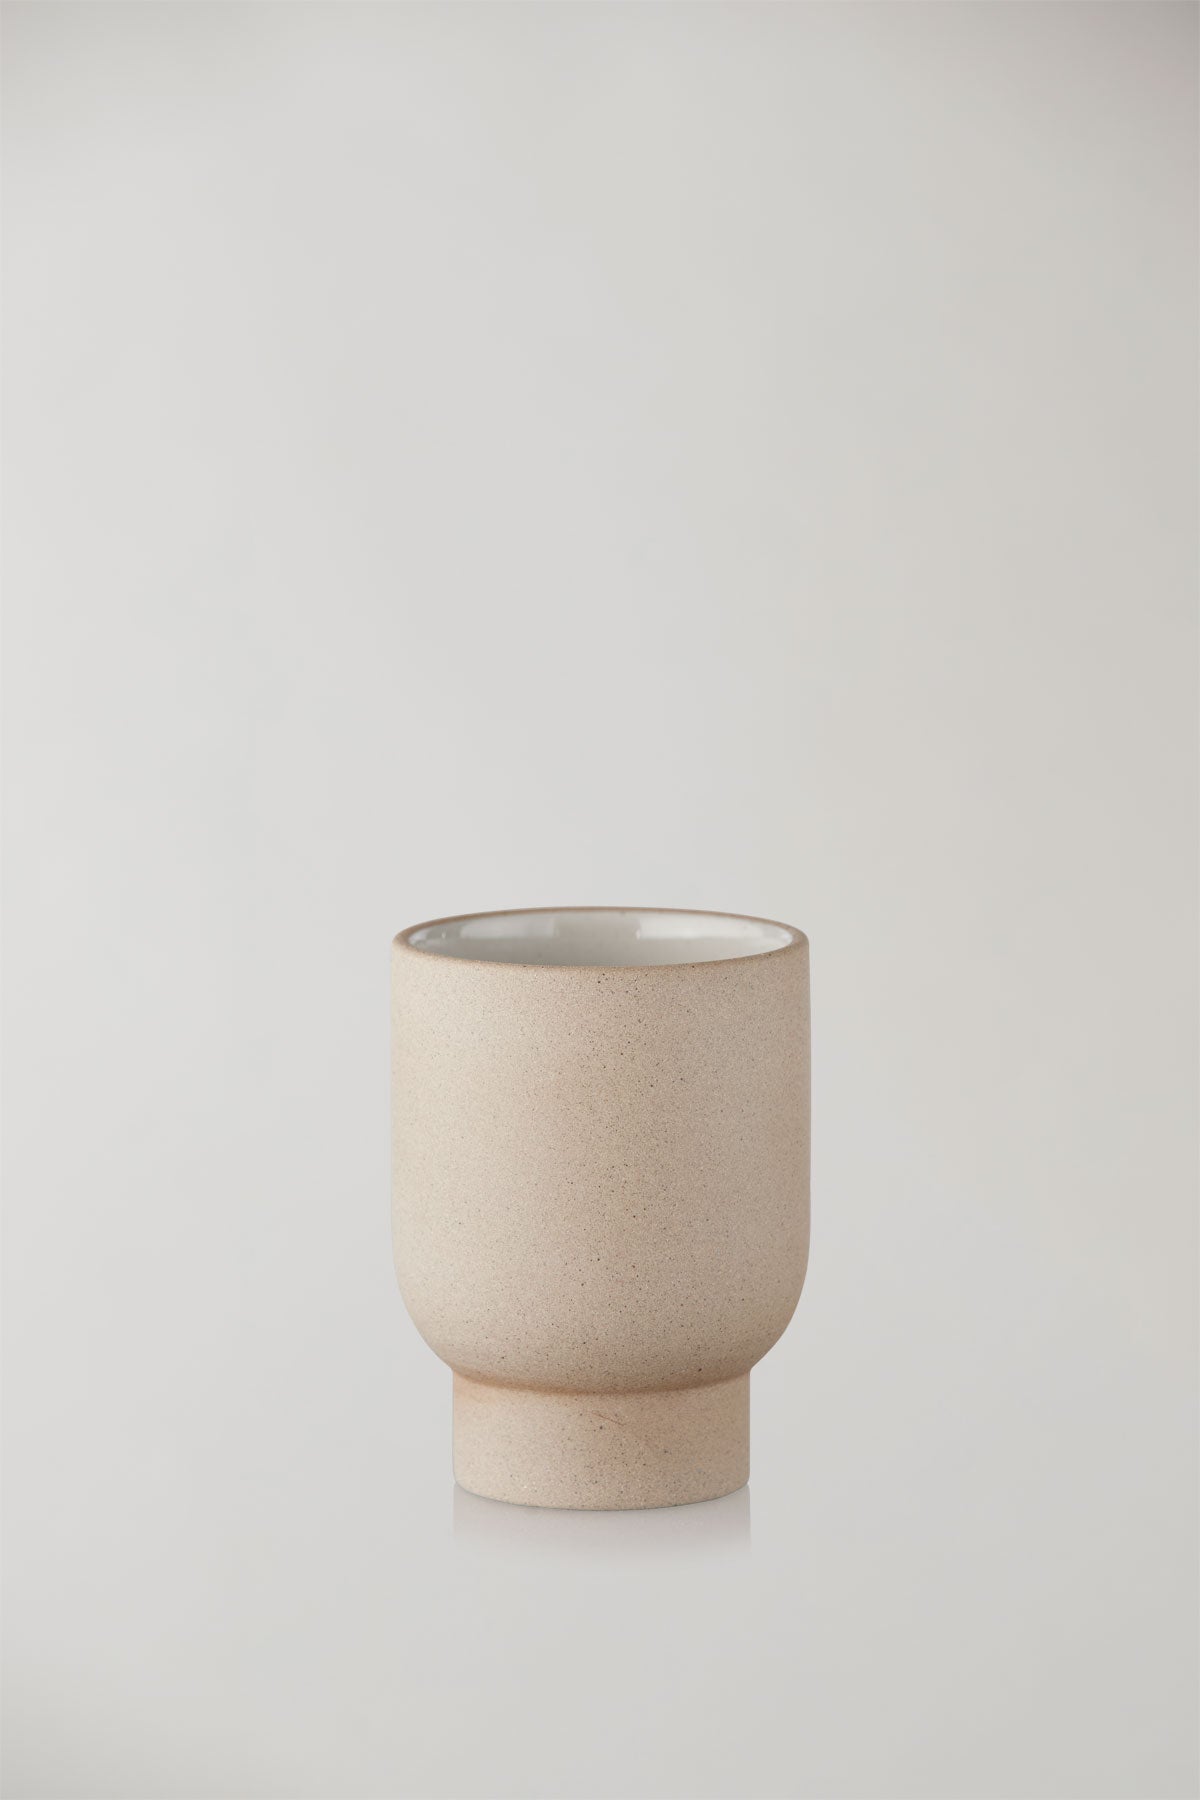 CLAYWARE, CUP, TALL, 2 STK, SAND/GREY